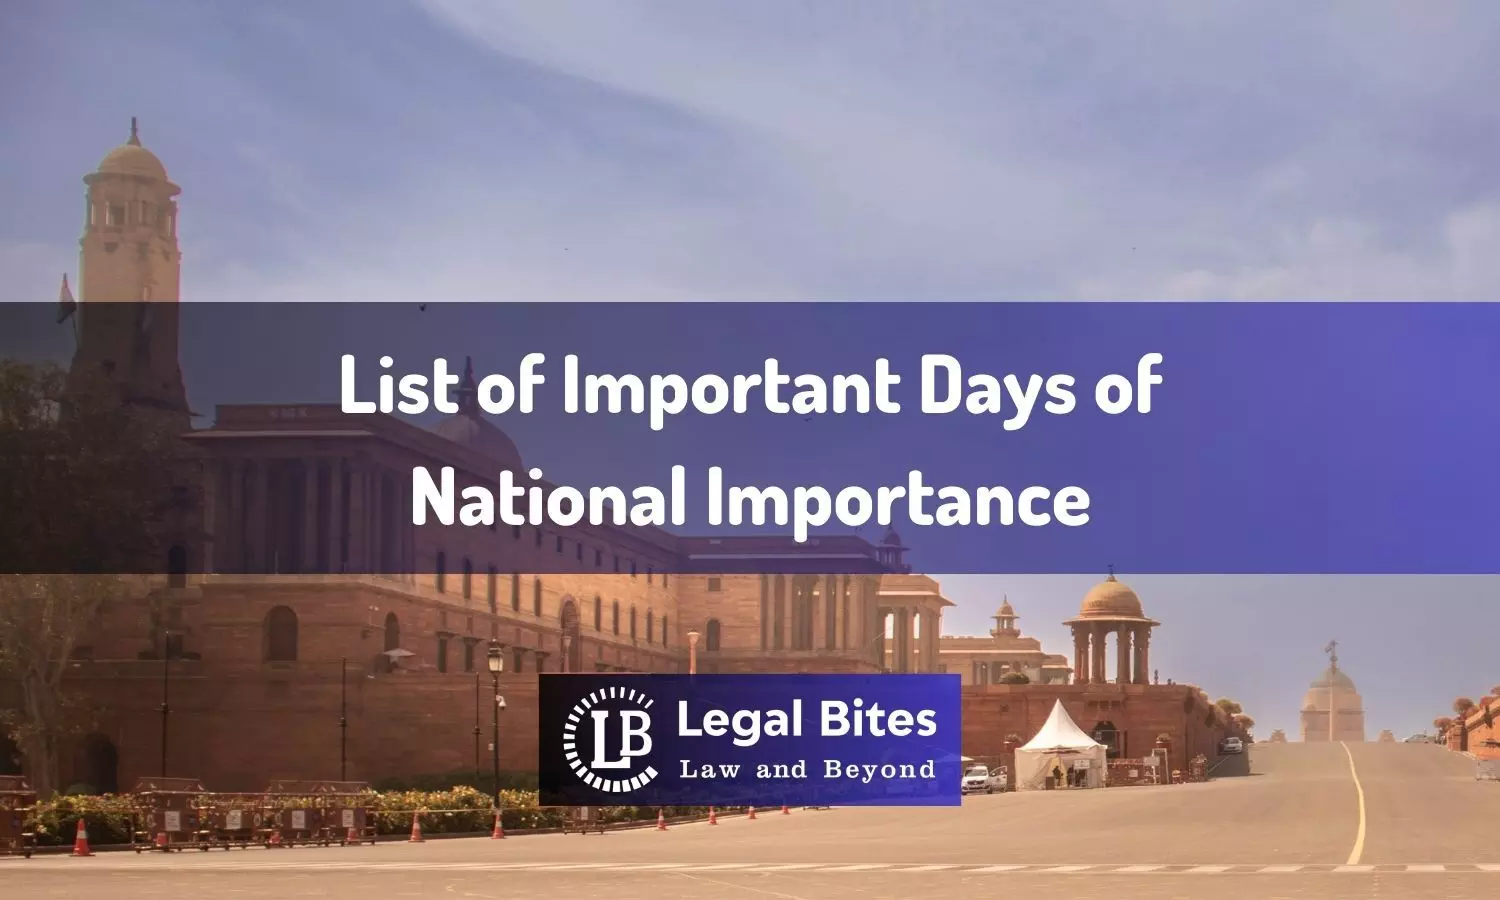 List of Important Days of National Importance